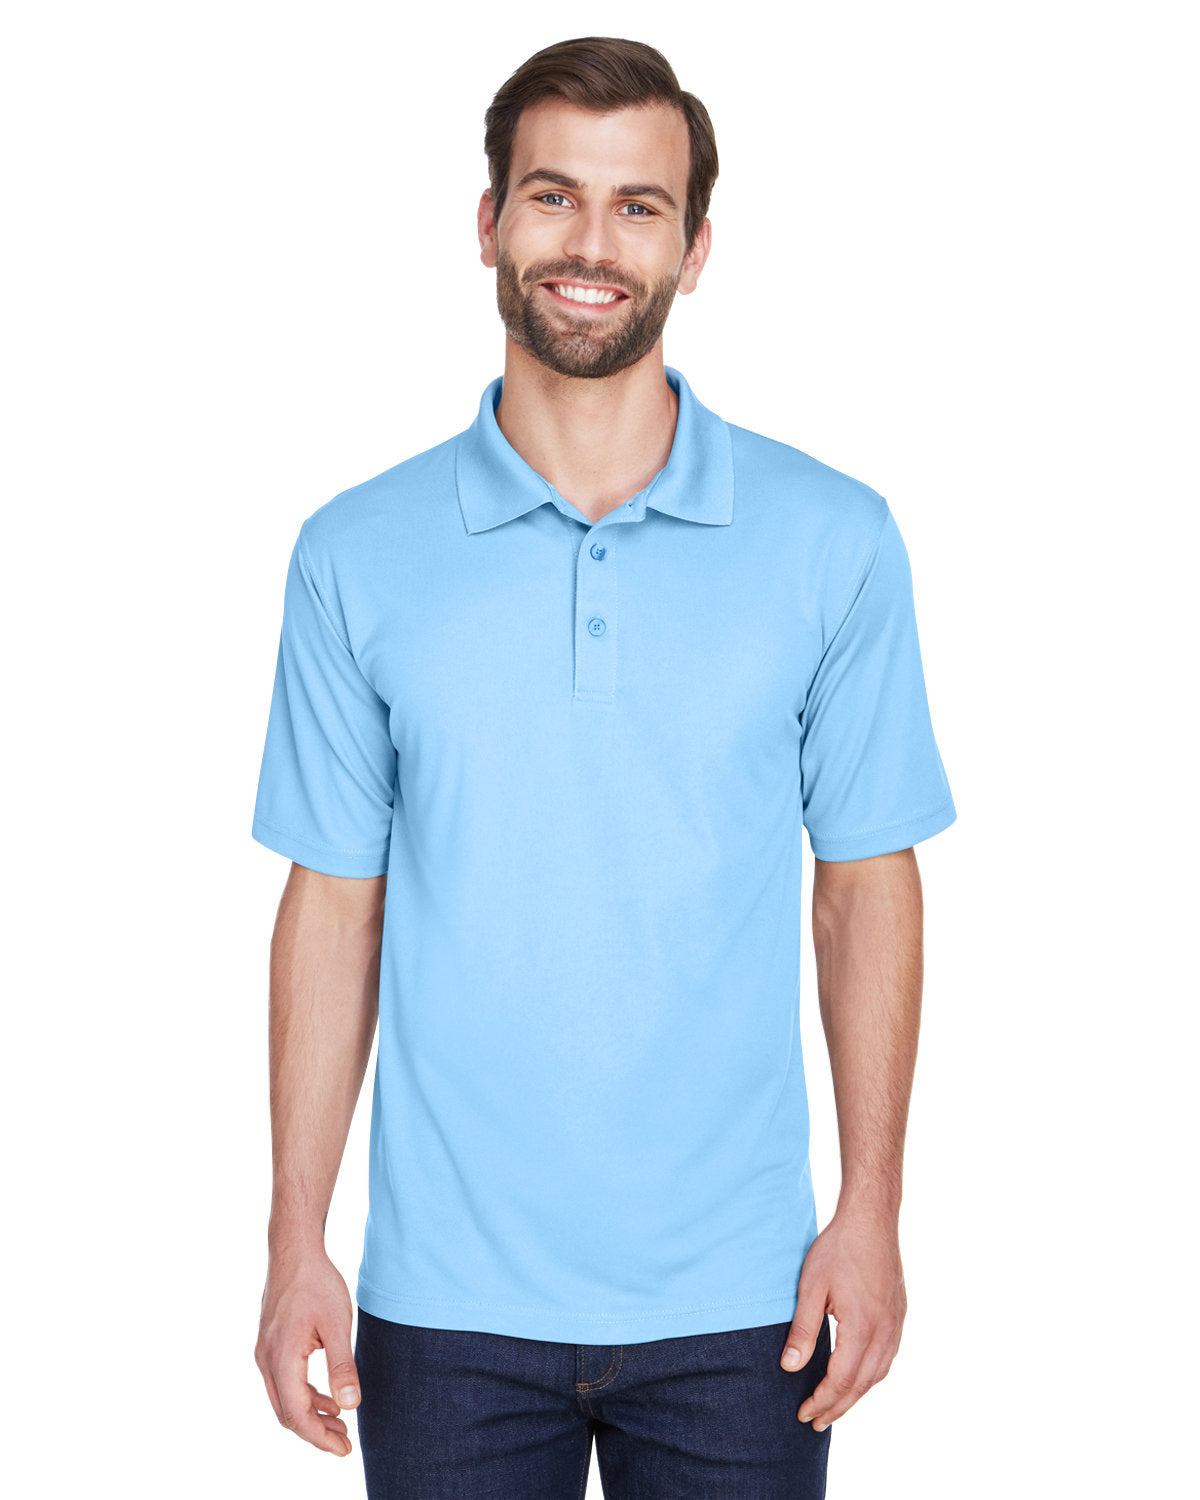 UltraClub 8210 Men's Cool & Dry Polo - Breathable MeshPique